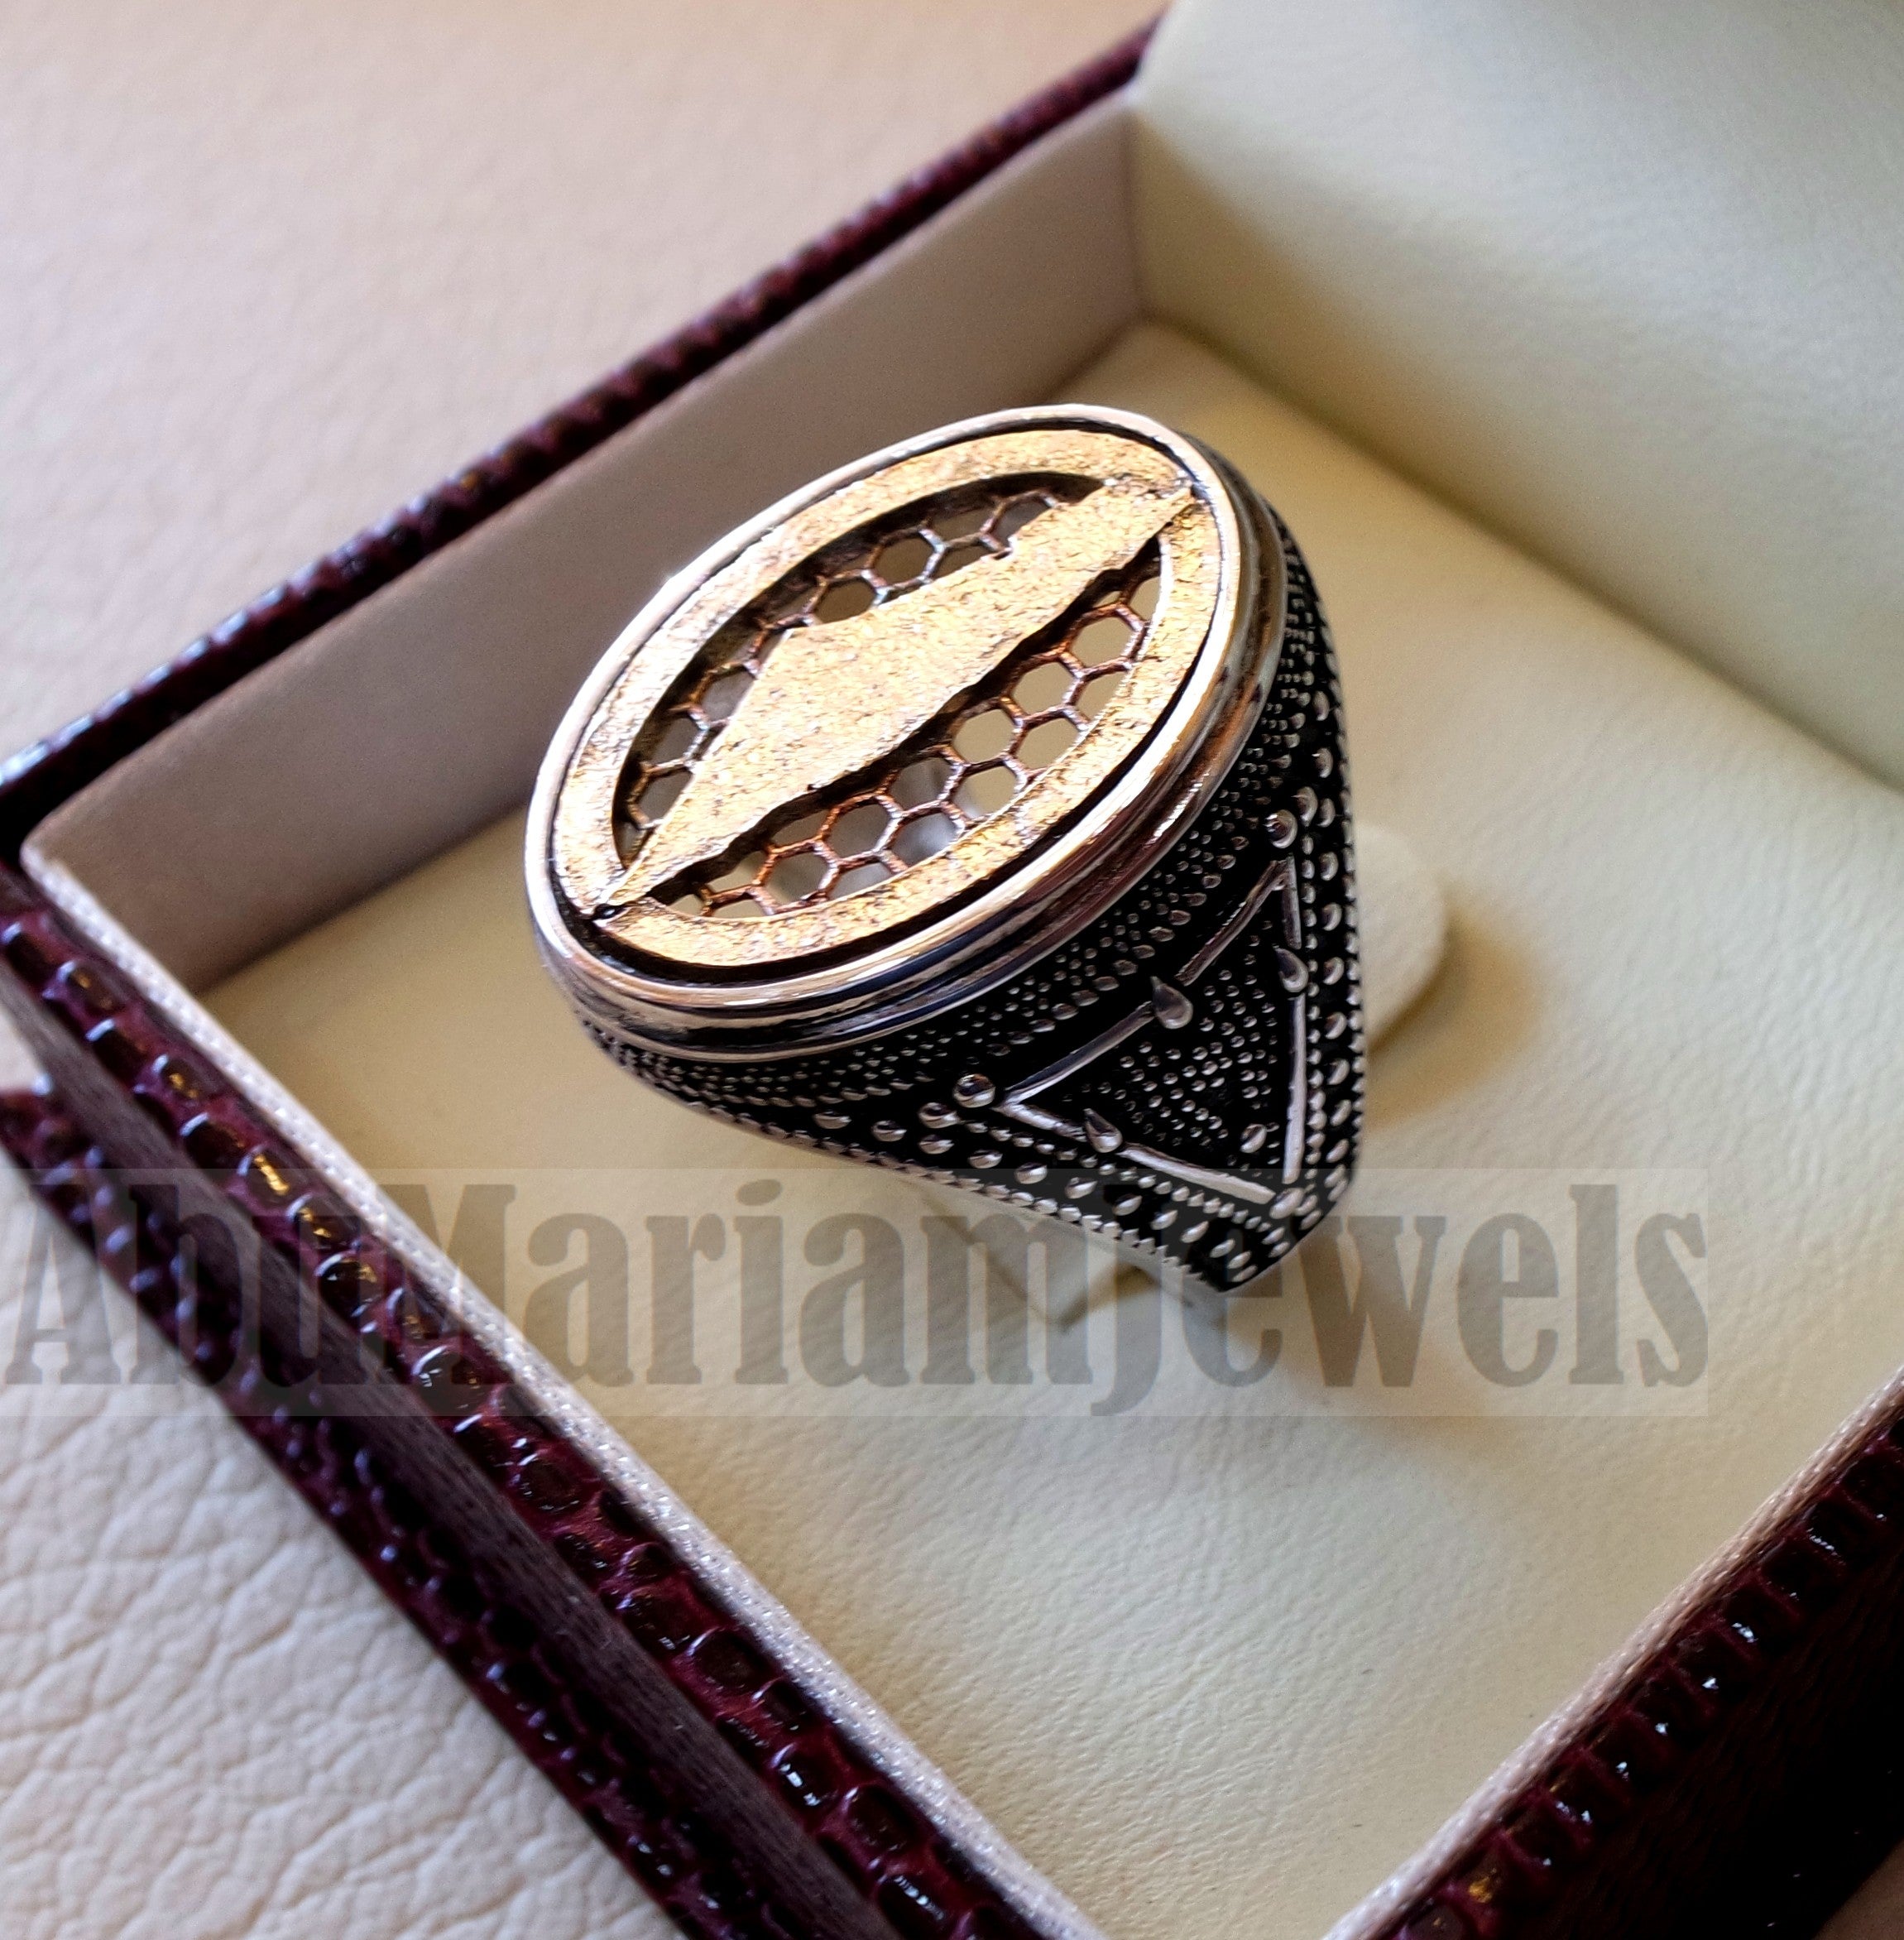 Nissan sterling silver 925 and bronze heavy man ring new car ideal gif –  Abu Mariam Jewelry